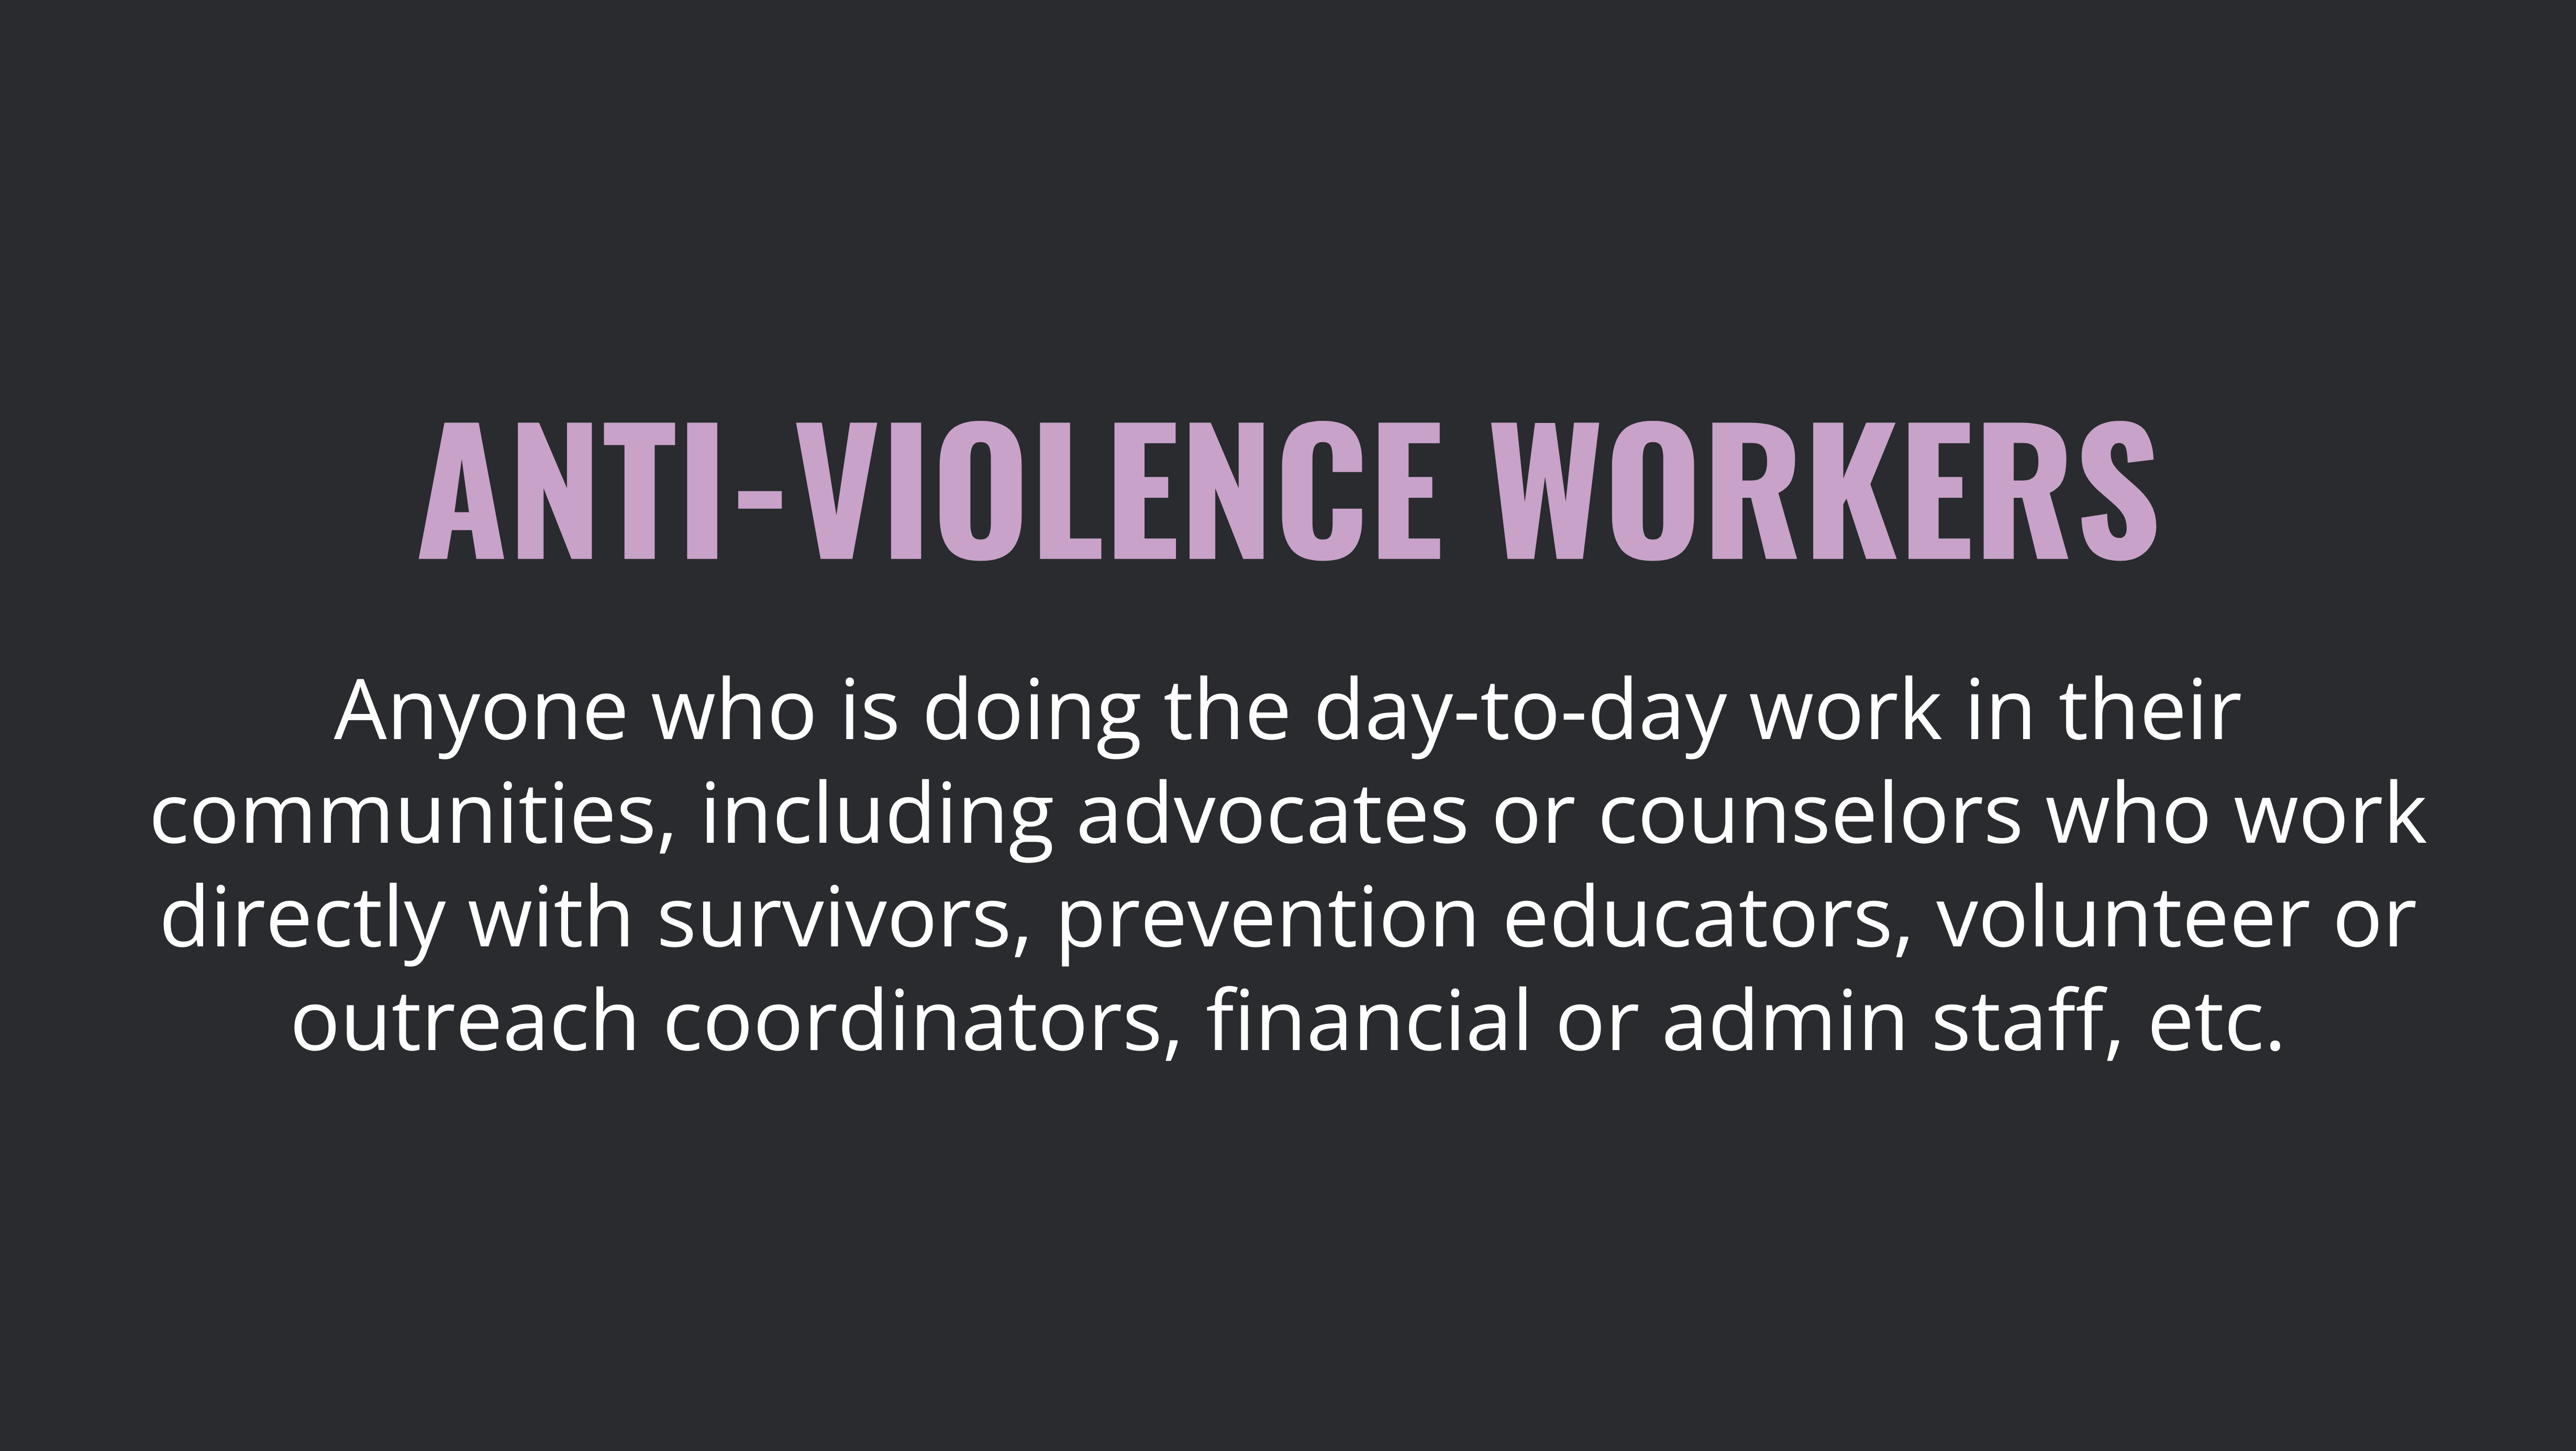 ANTI-VIOLENCE WORKERS